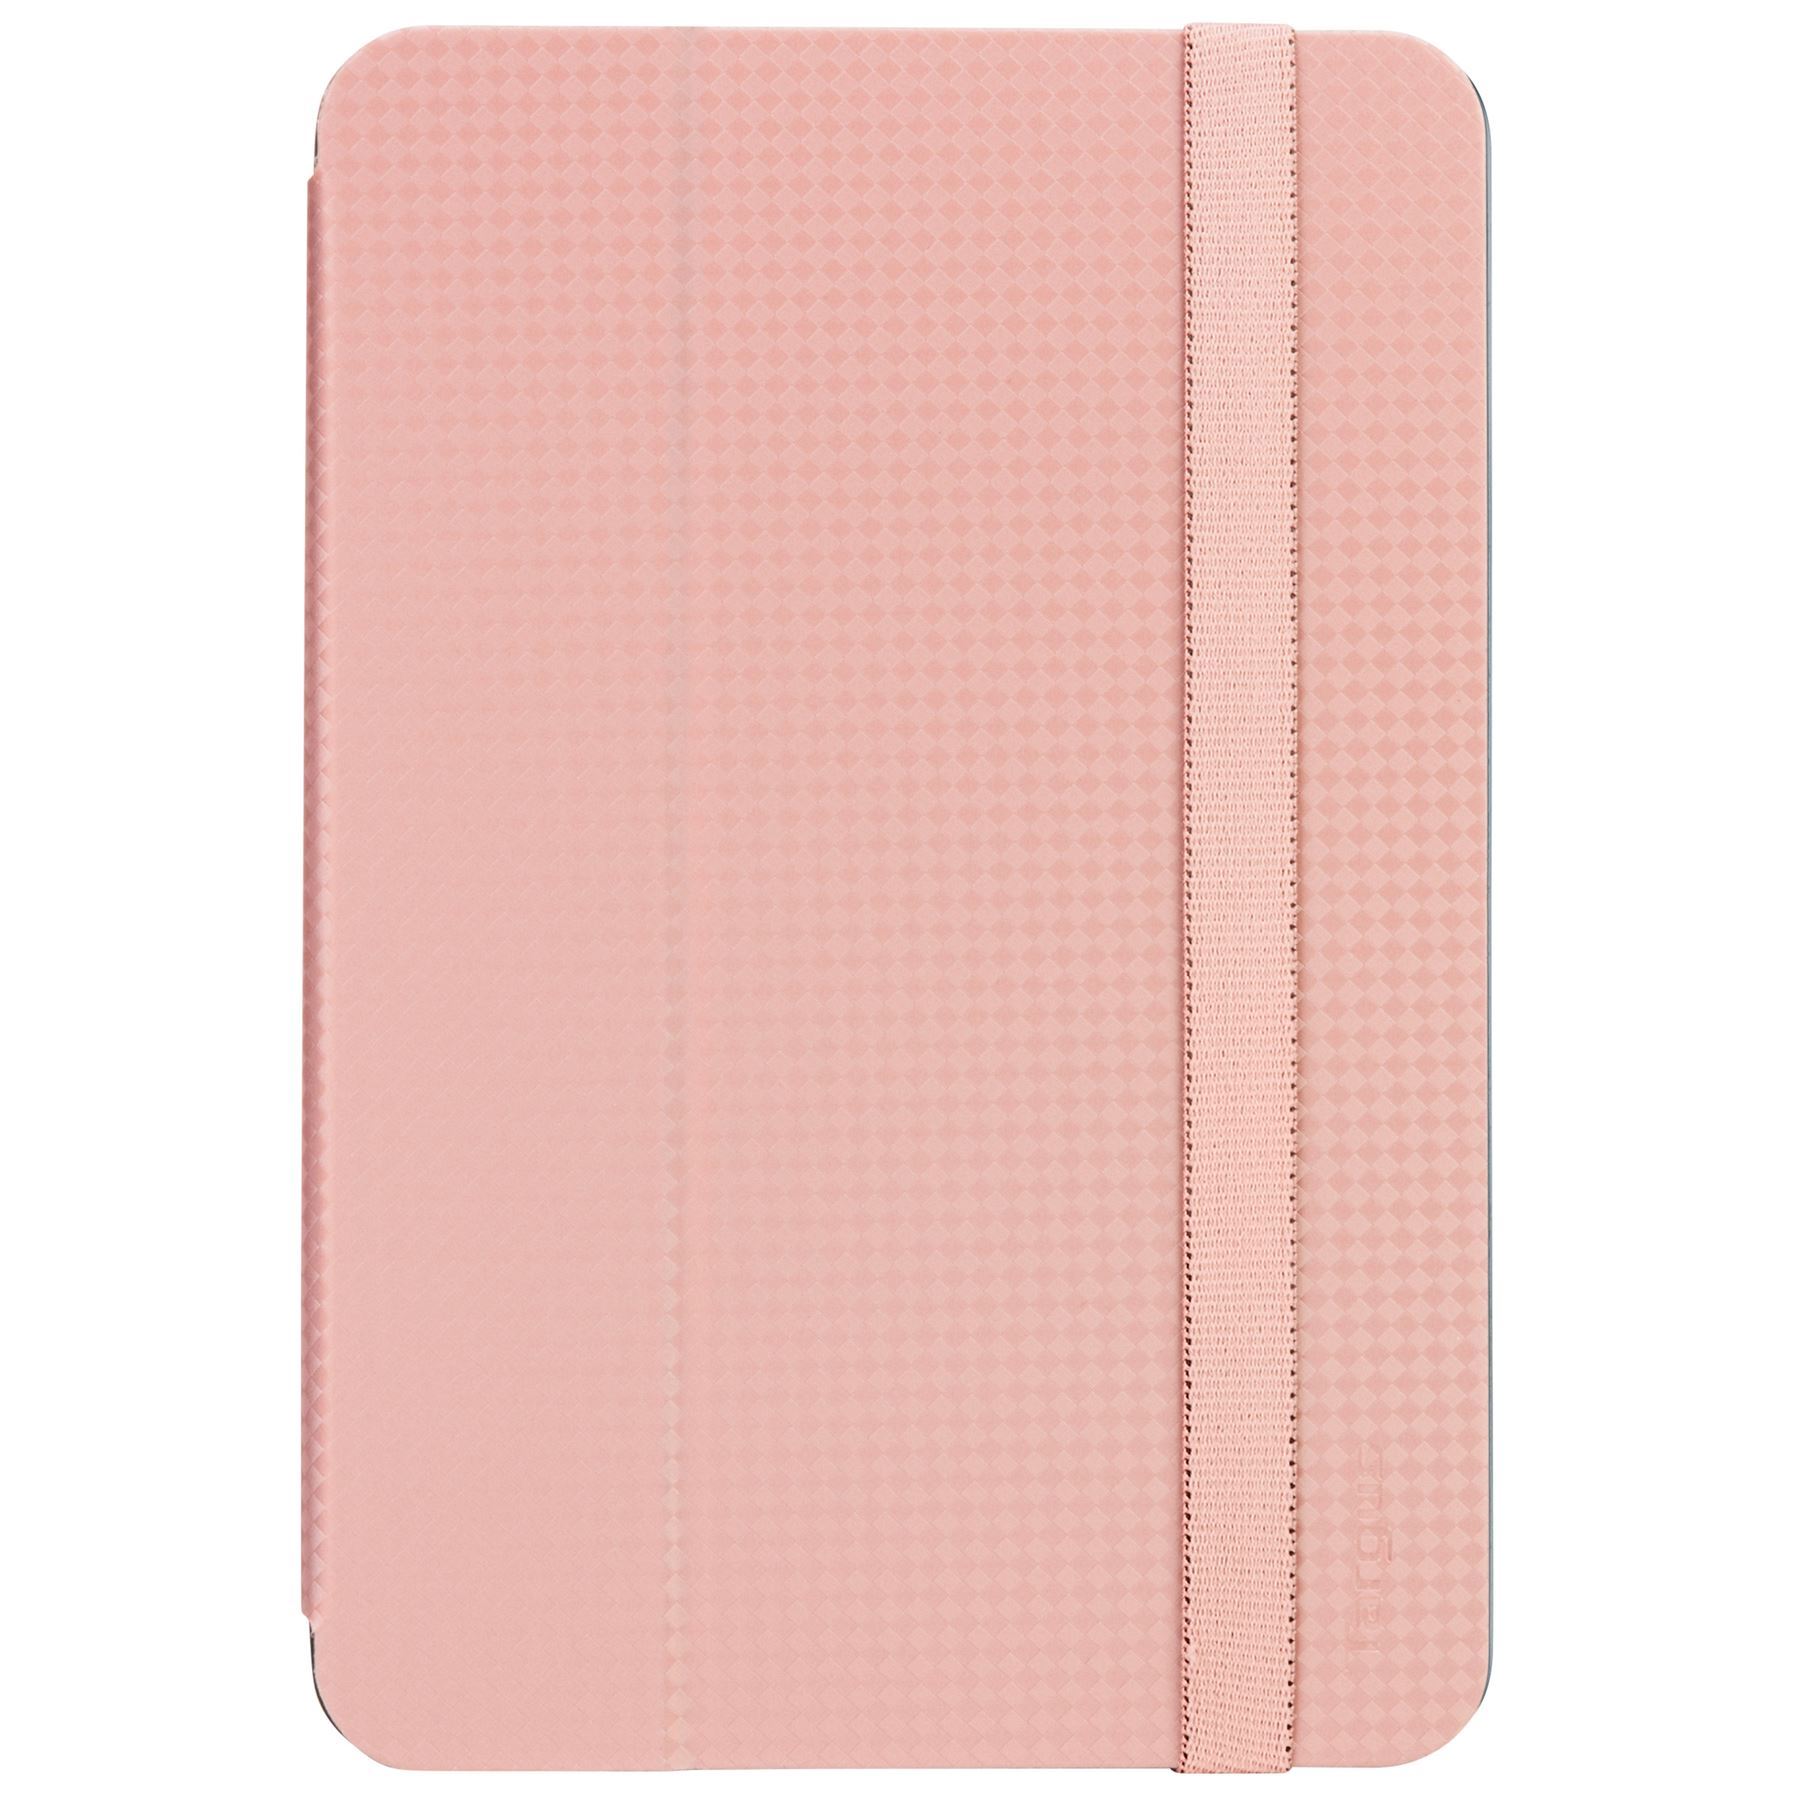 Click-In iPad mini 4, 3, 2, 1 Tablet Case - Rose Gold